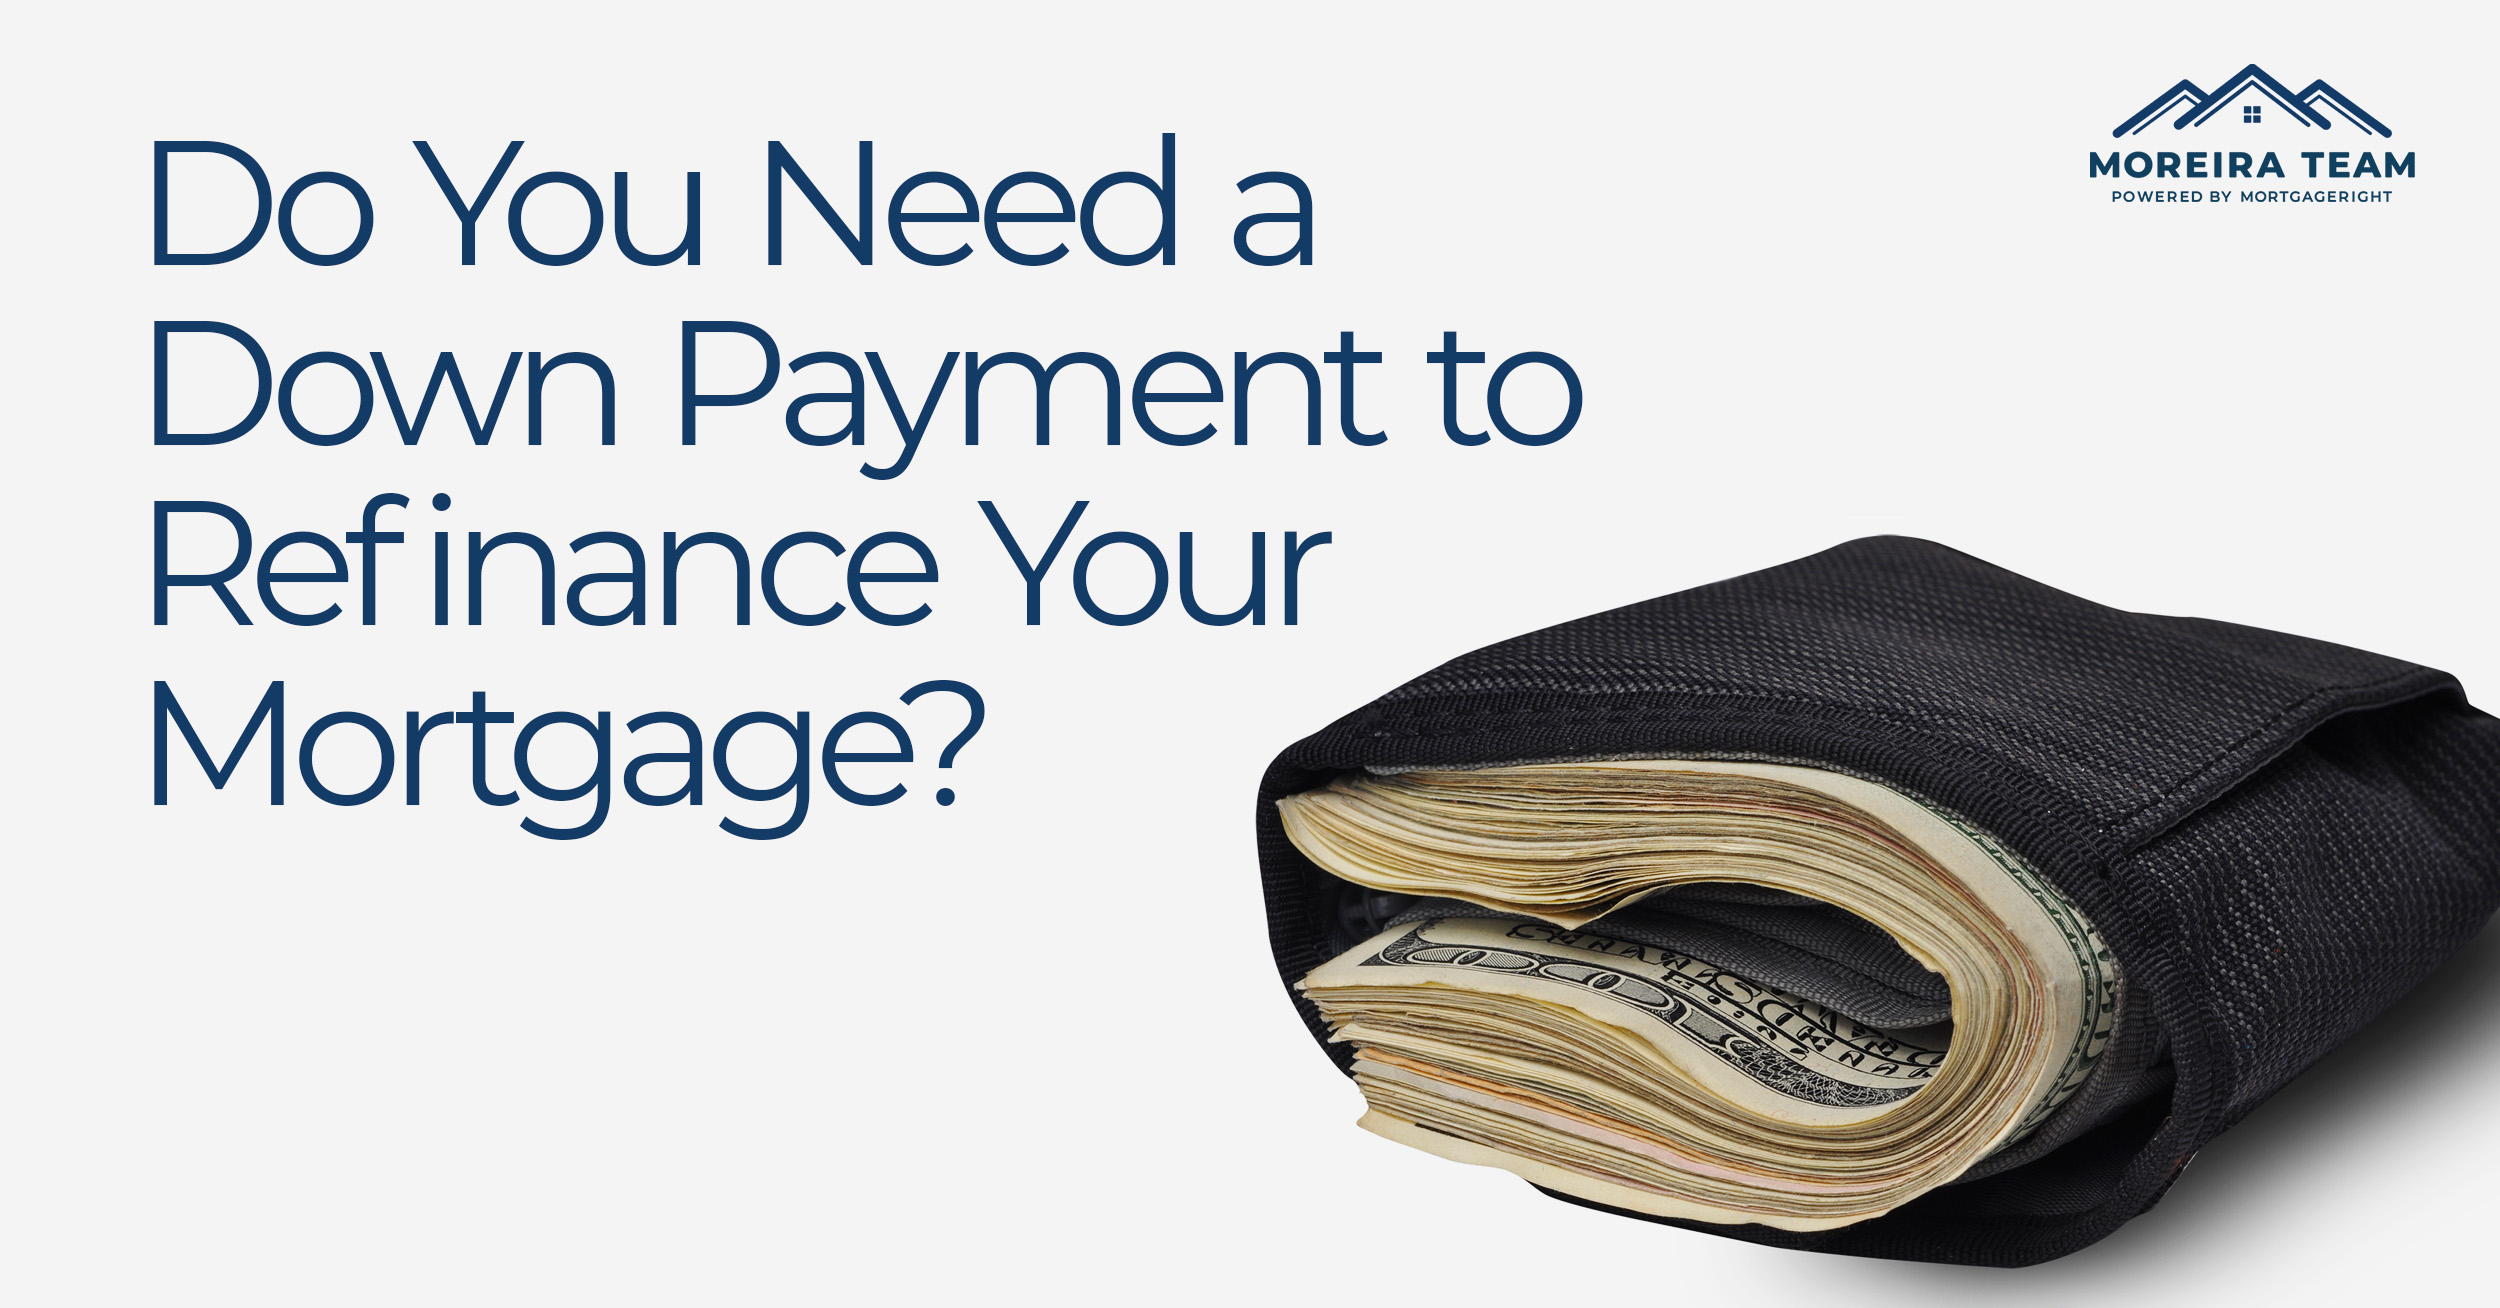 Do You Need a Down Payment to Refinance Your Mortgage? Here are Some Options